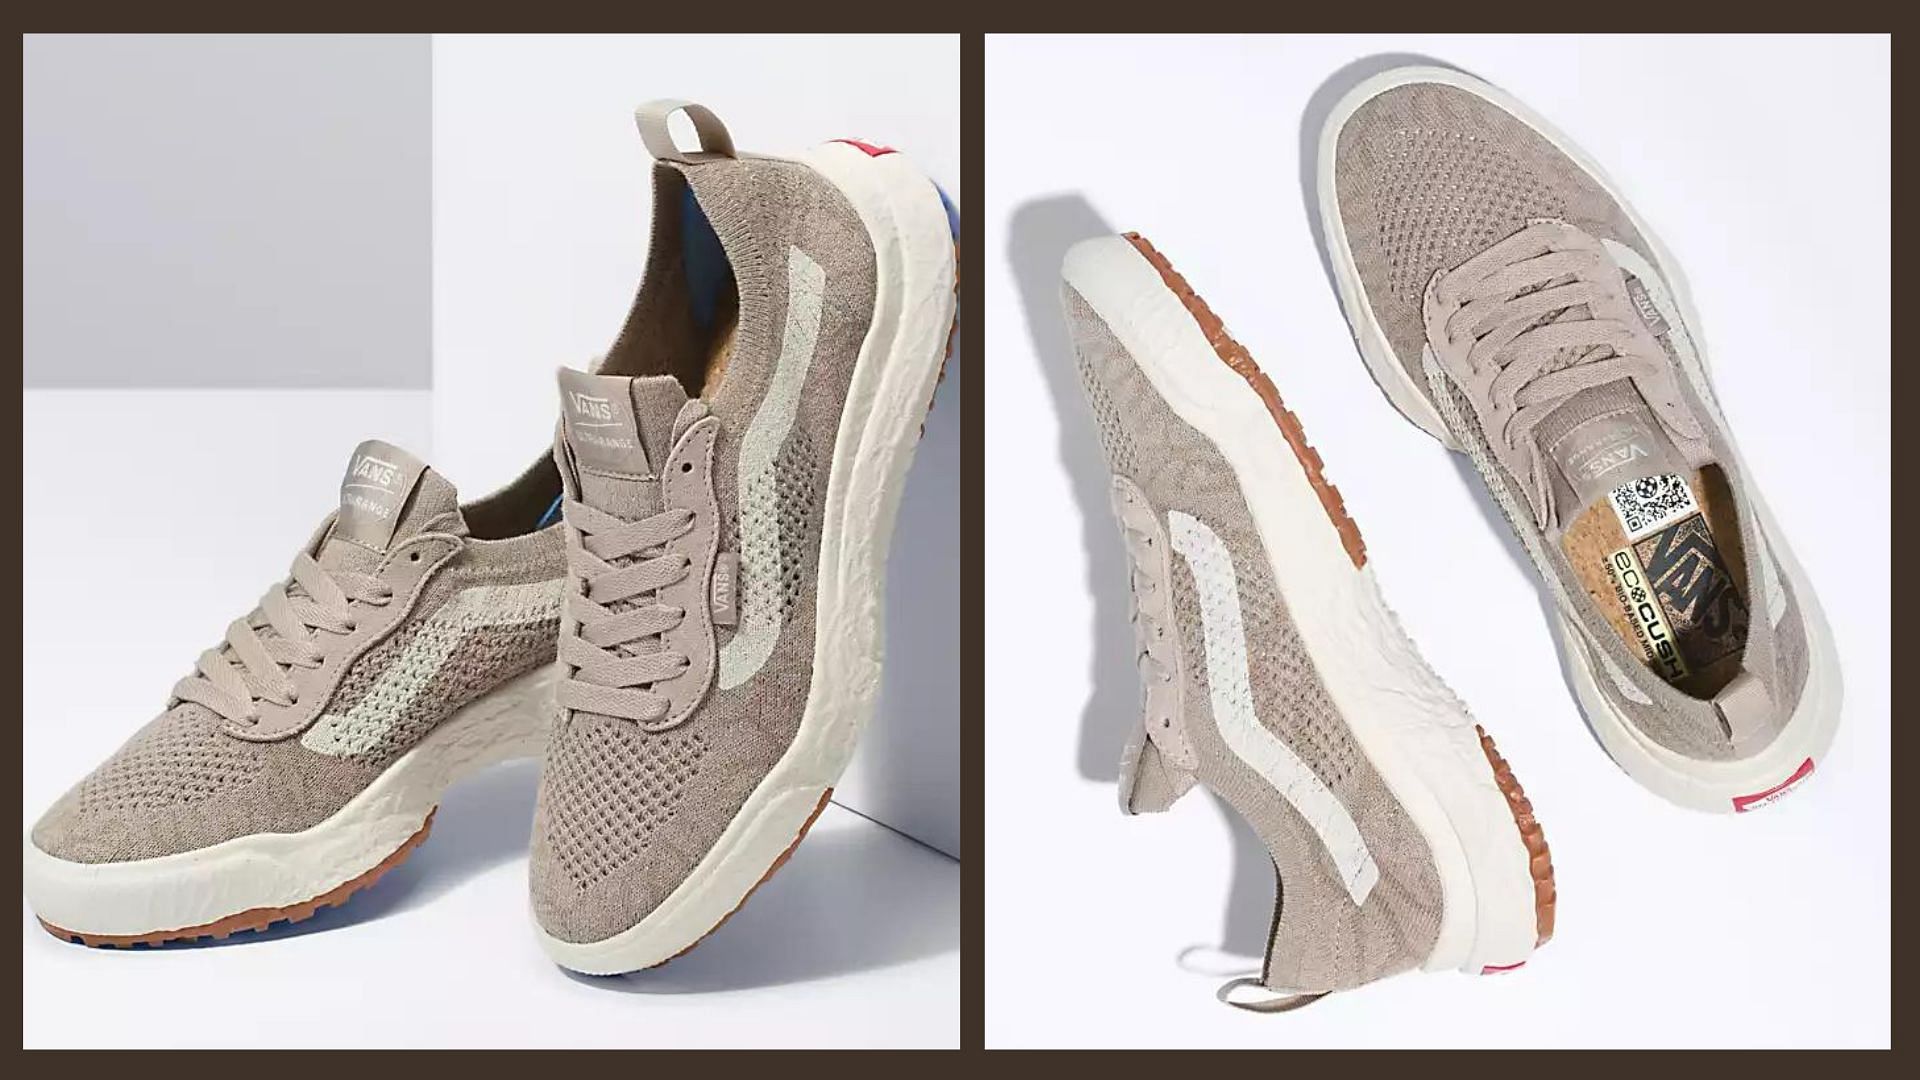 Take a detailed look at the Cobblestone sneakers (Image via Vans.com)